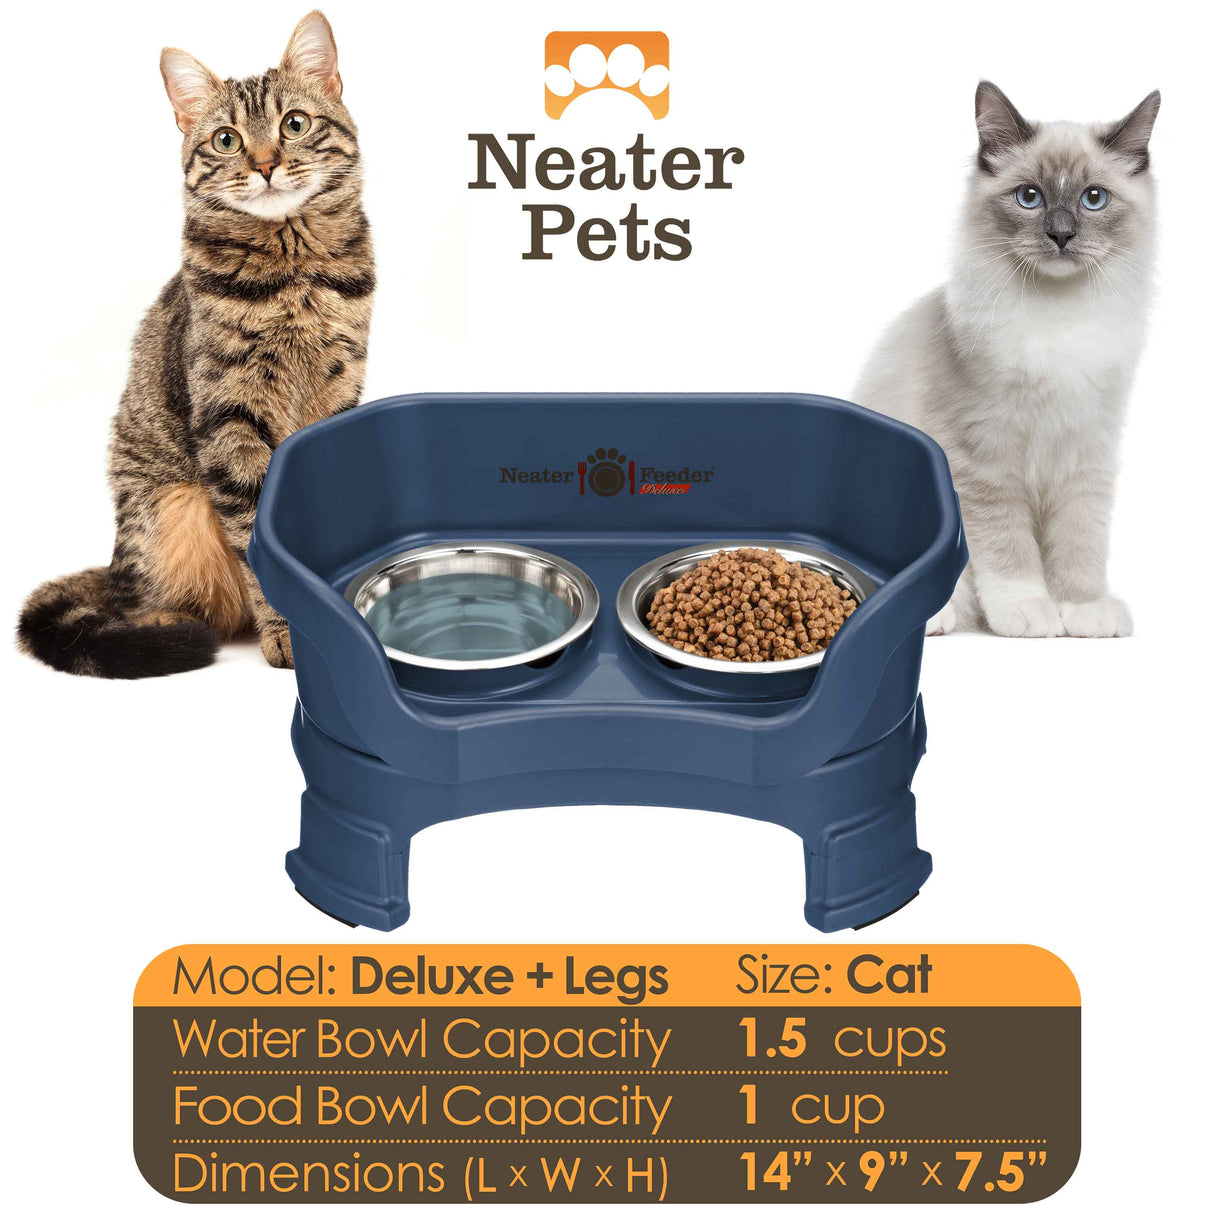 Neater Feeder Deluxe cat bowl capacity and dimensions